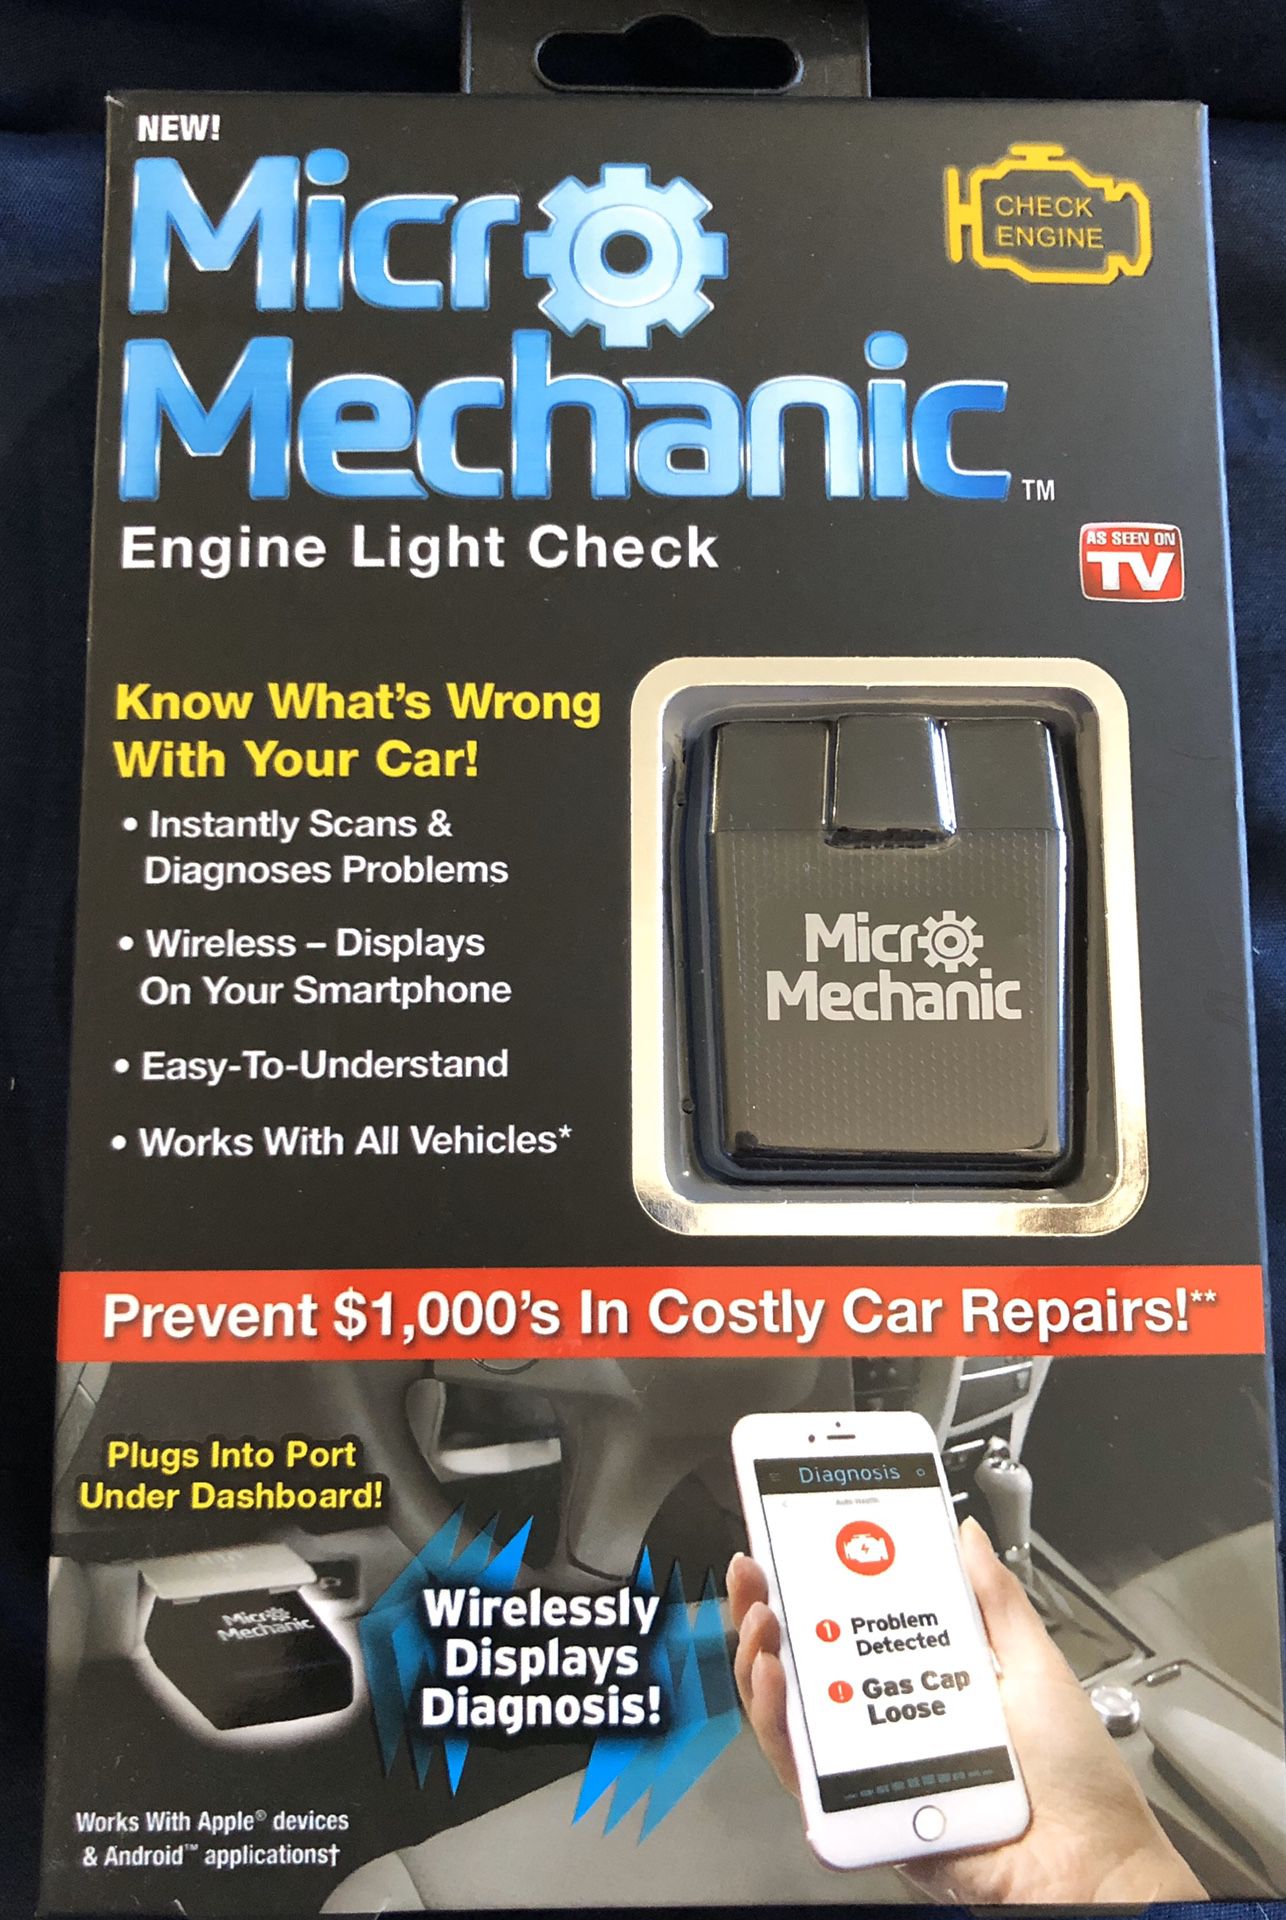 BRAND NEW, NEVER USED Micro Mechanic Auto Diagnostic Scanner As Seen On TV